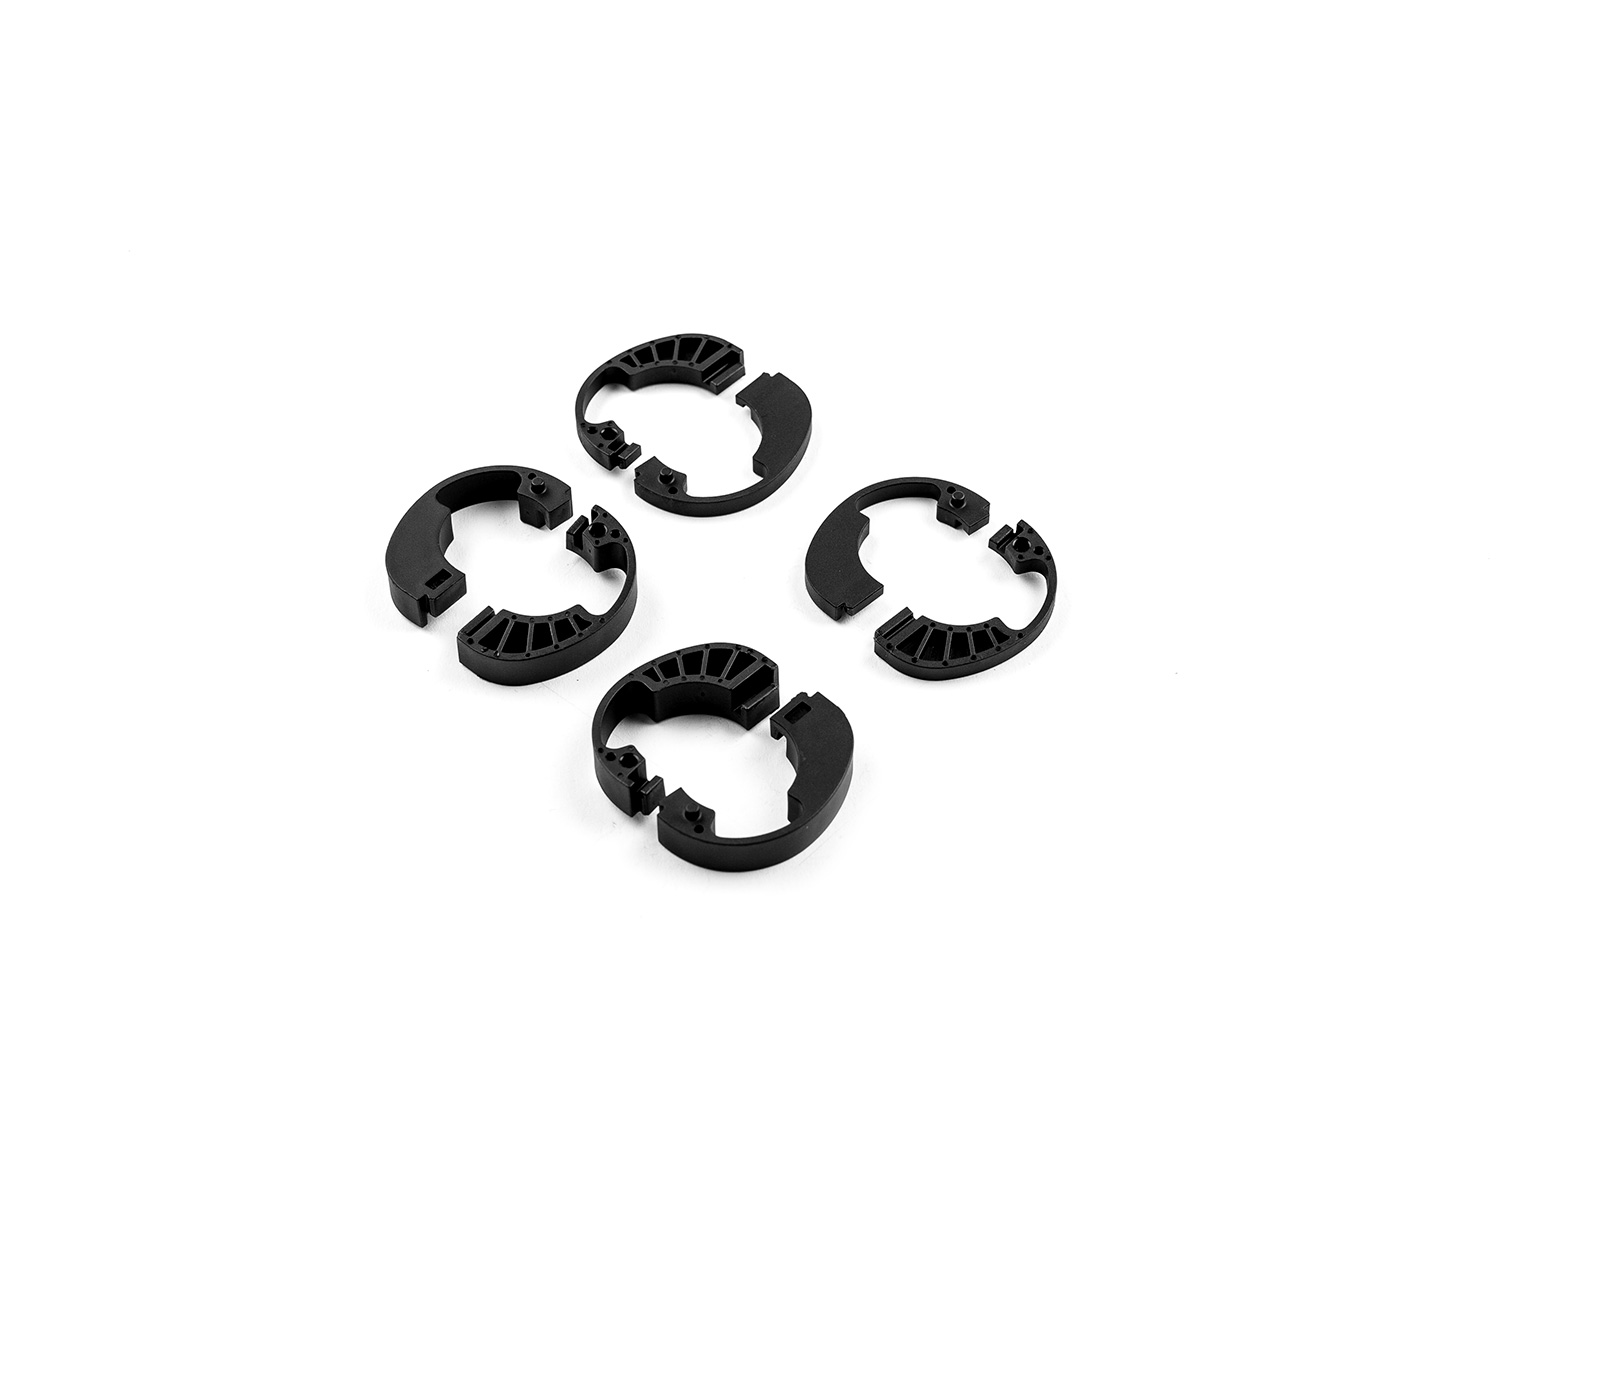 HEADSET SPACER KIT INTERNAL CABLING ST-RP21 ROUND